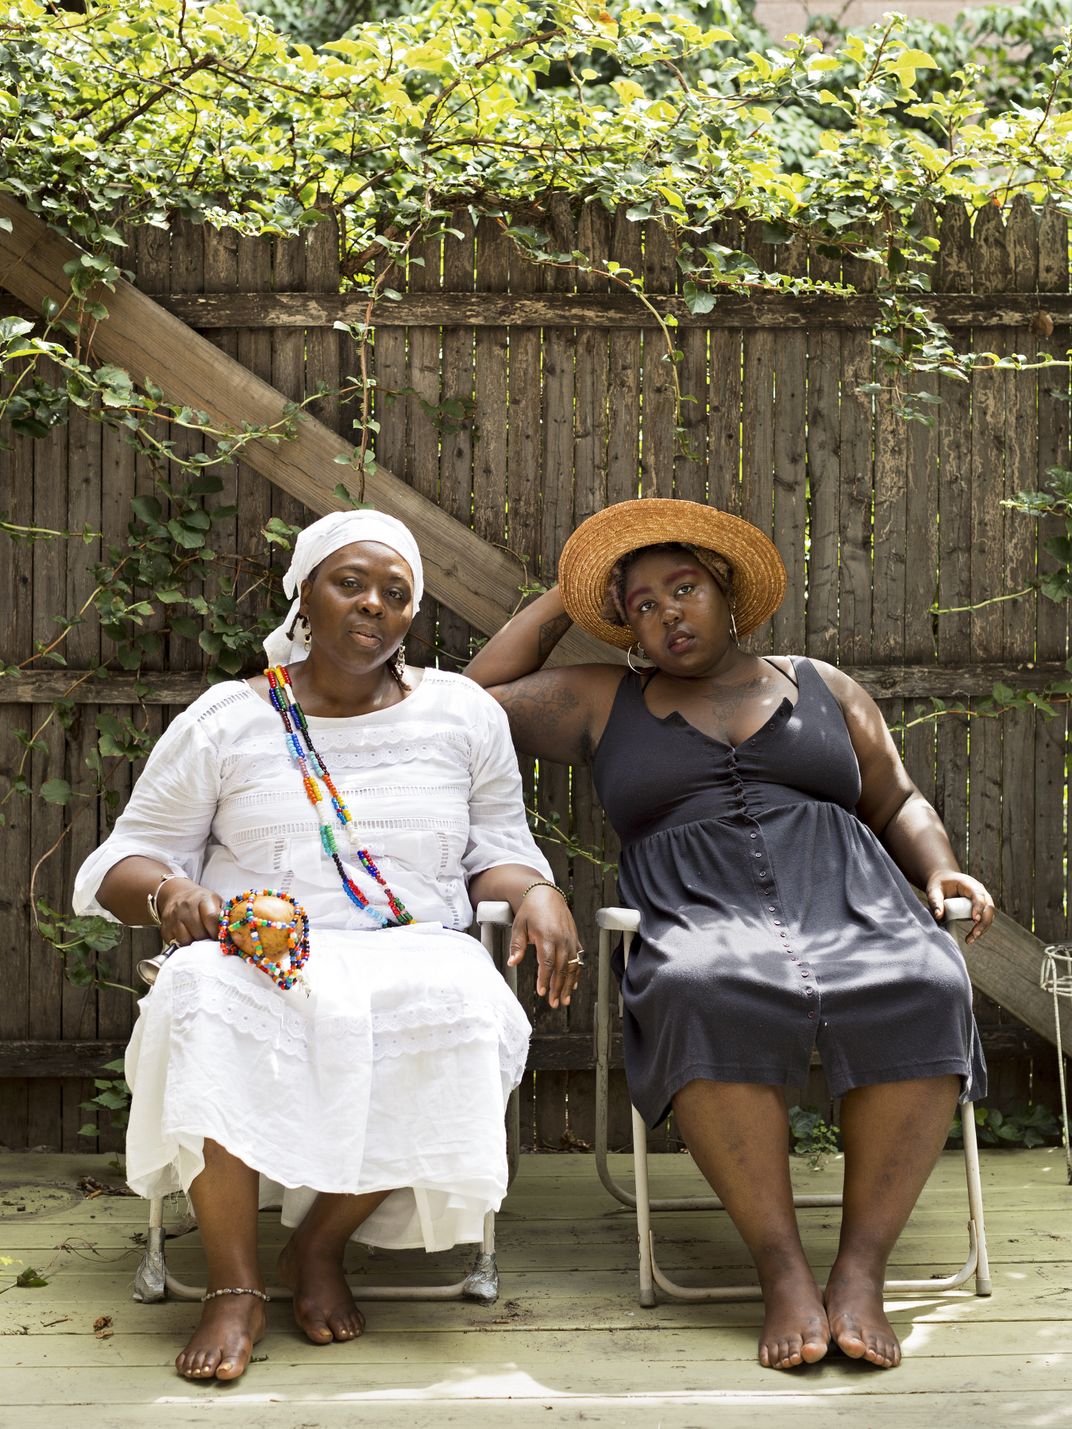 A portrait of two Black women seated outside, side-by-side, facing the viewer; one wears a white dress and the other wears a black dress and a sunhat